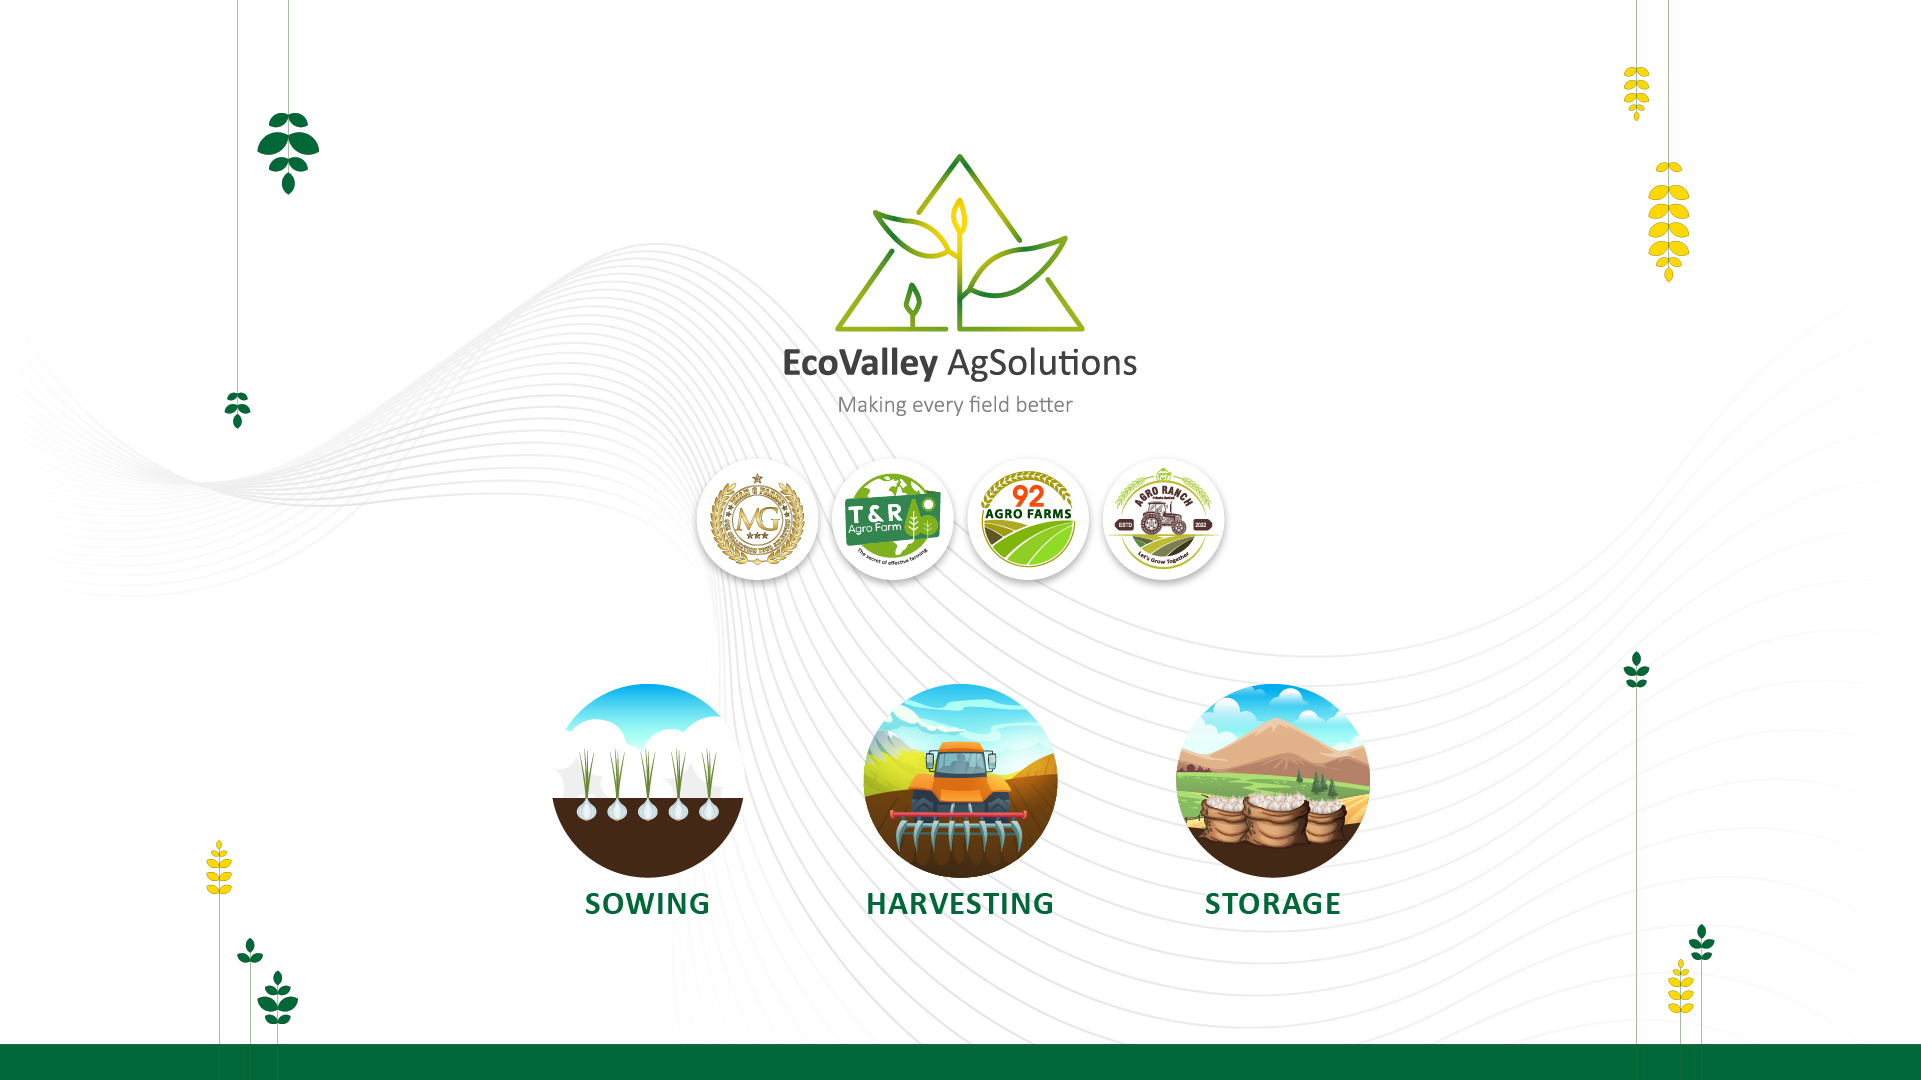 EcoValley AgSolutions